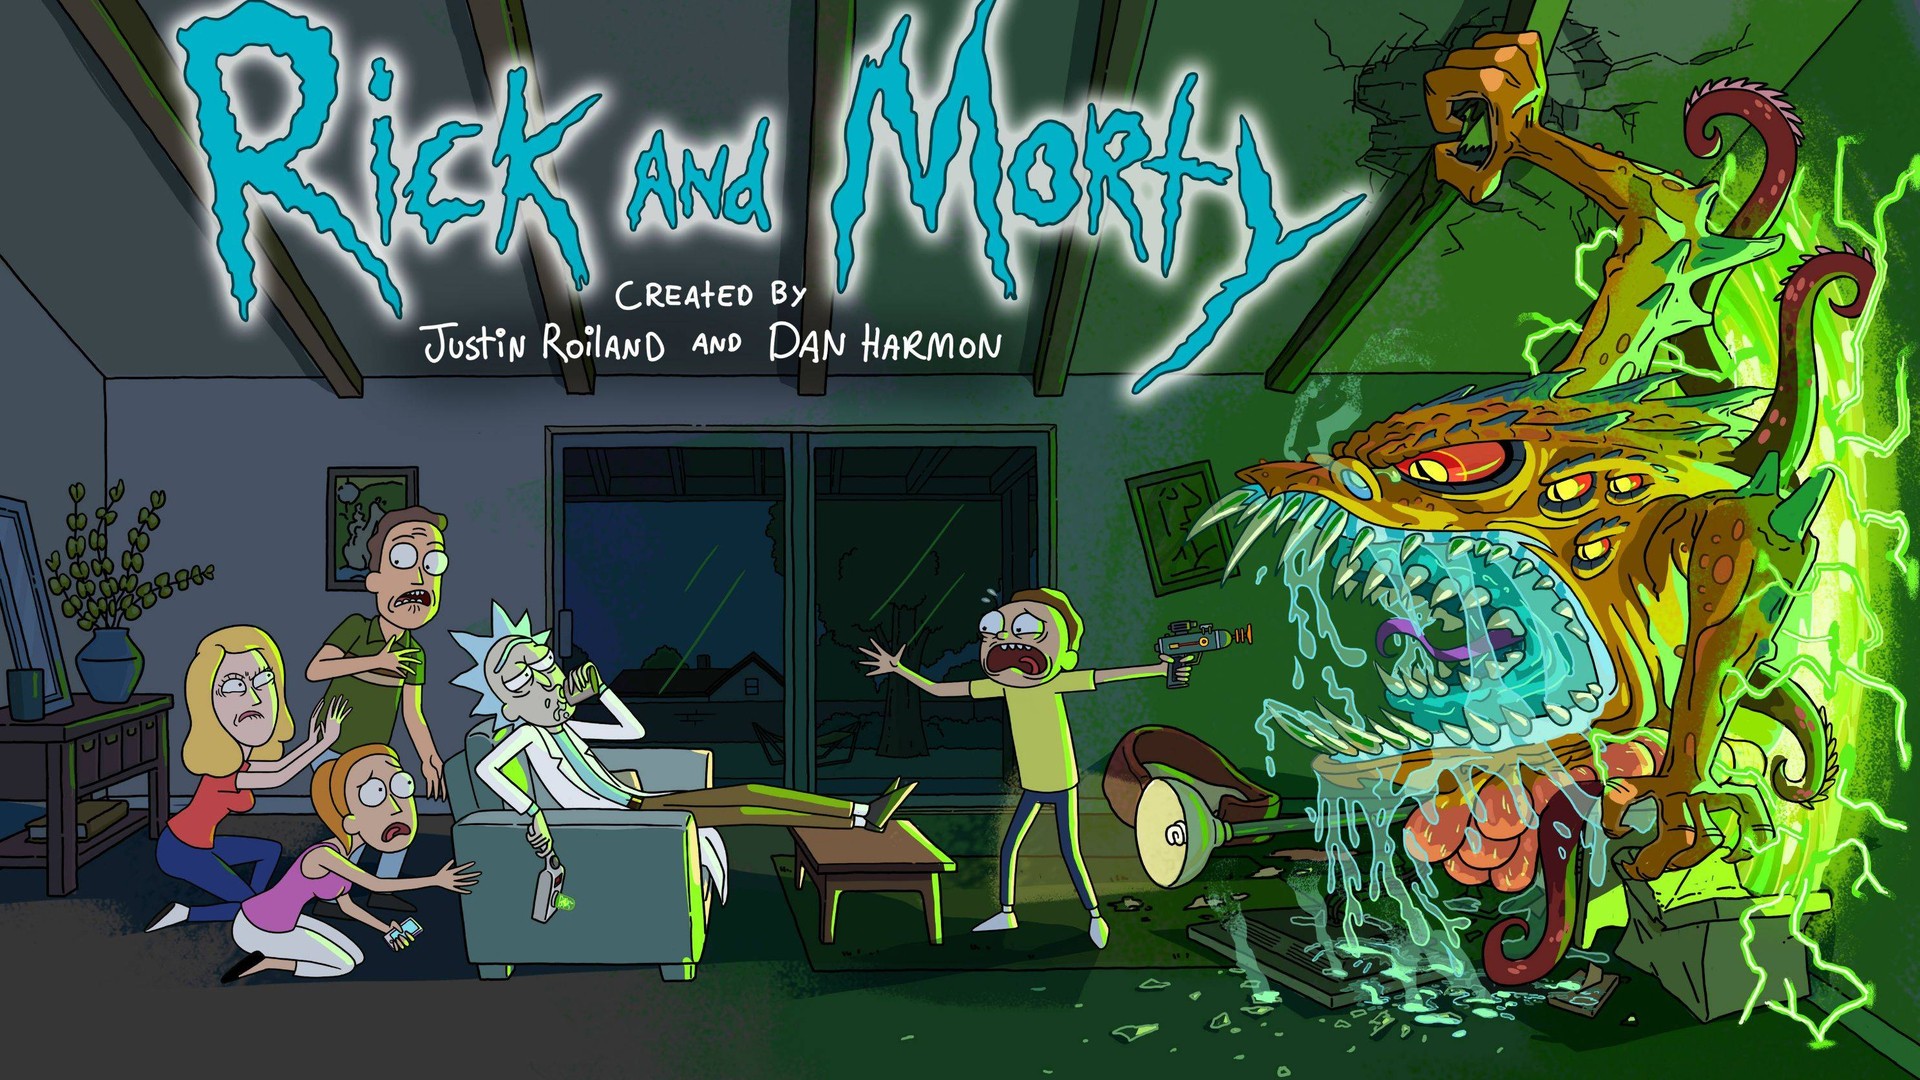 Rick and Morty Wallpaper HD with high-resolution 1920x1080 pixel. You can use this poster wallpaper for your Desktop Computers, Mac Screensavers, Windows Backgrounds, iPhone Wallpapers, Tablet or Android Lock screen and another Mobile device